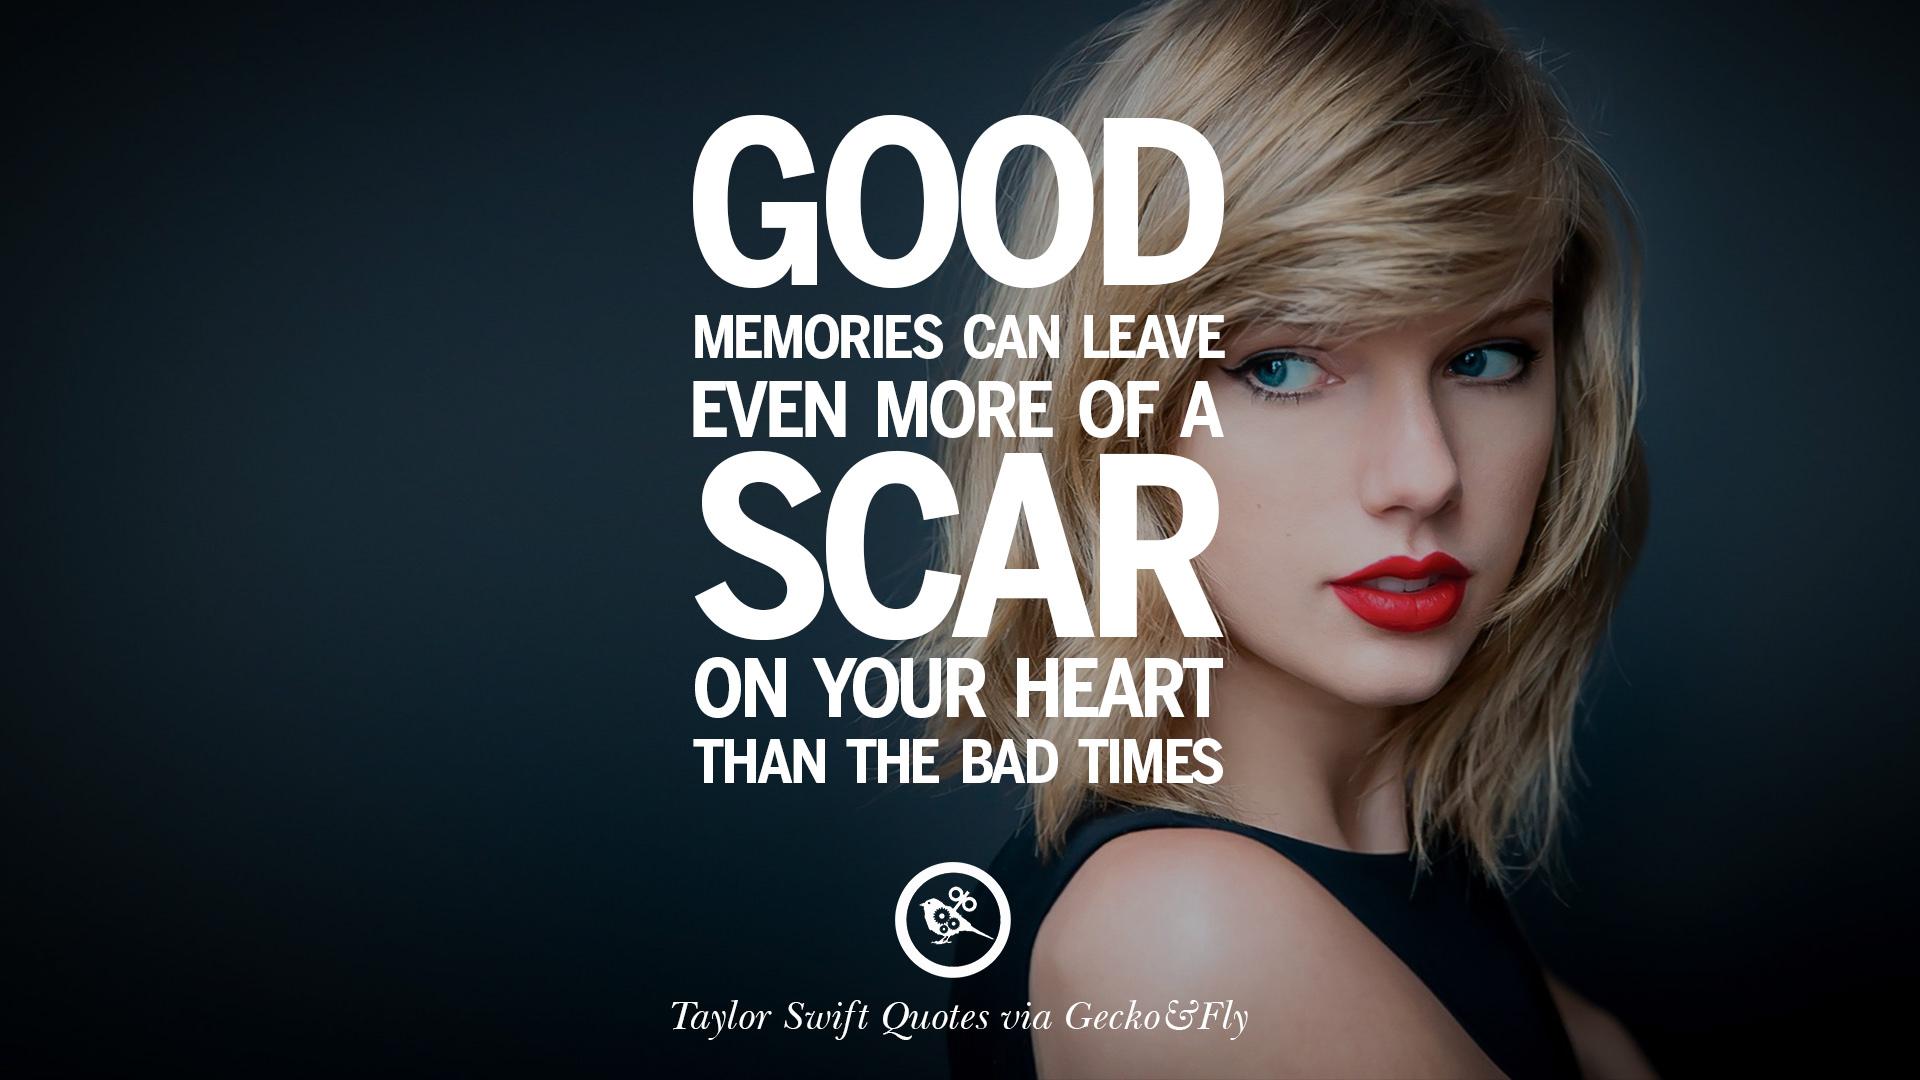 Inspiring Taylor Swift Quotes On Believing In Yourself